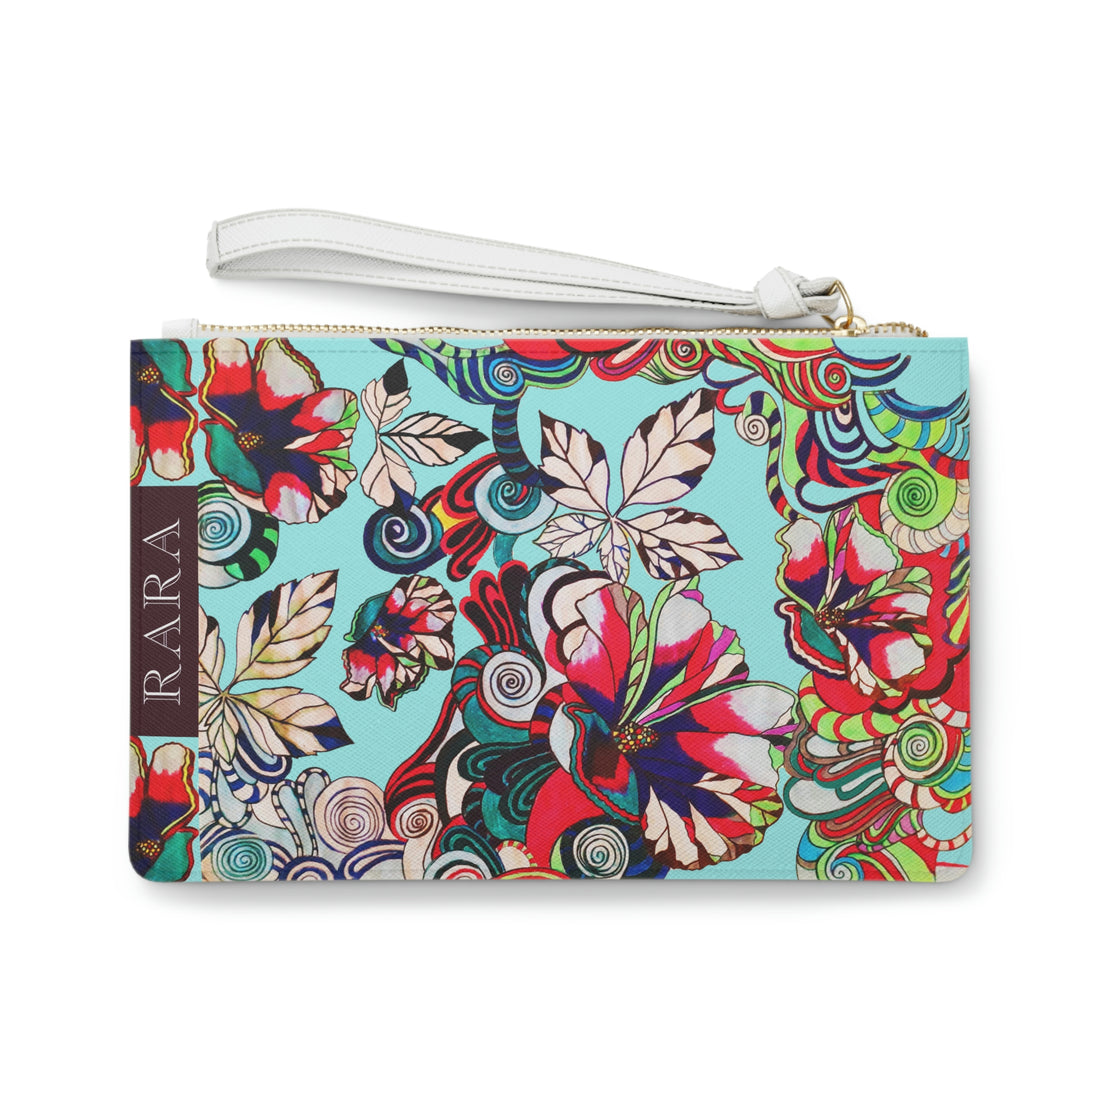 graphic floral icy blue clutch bag